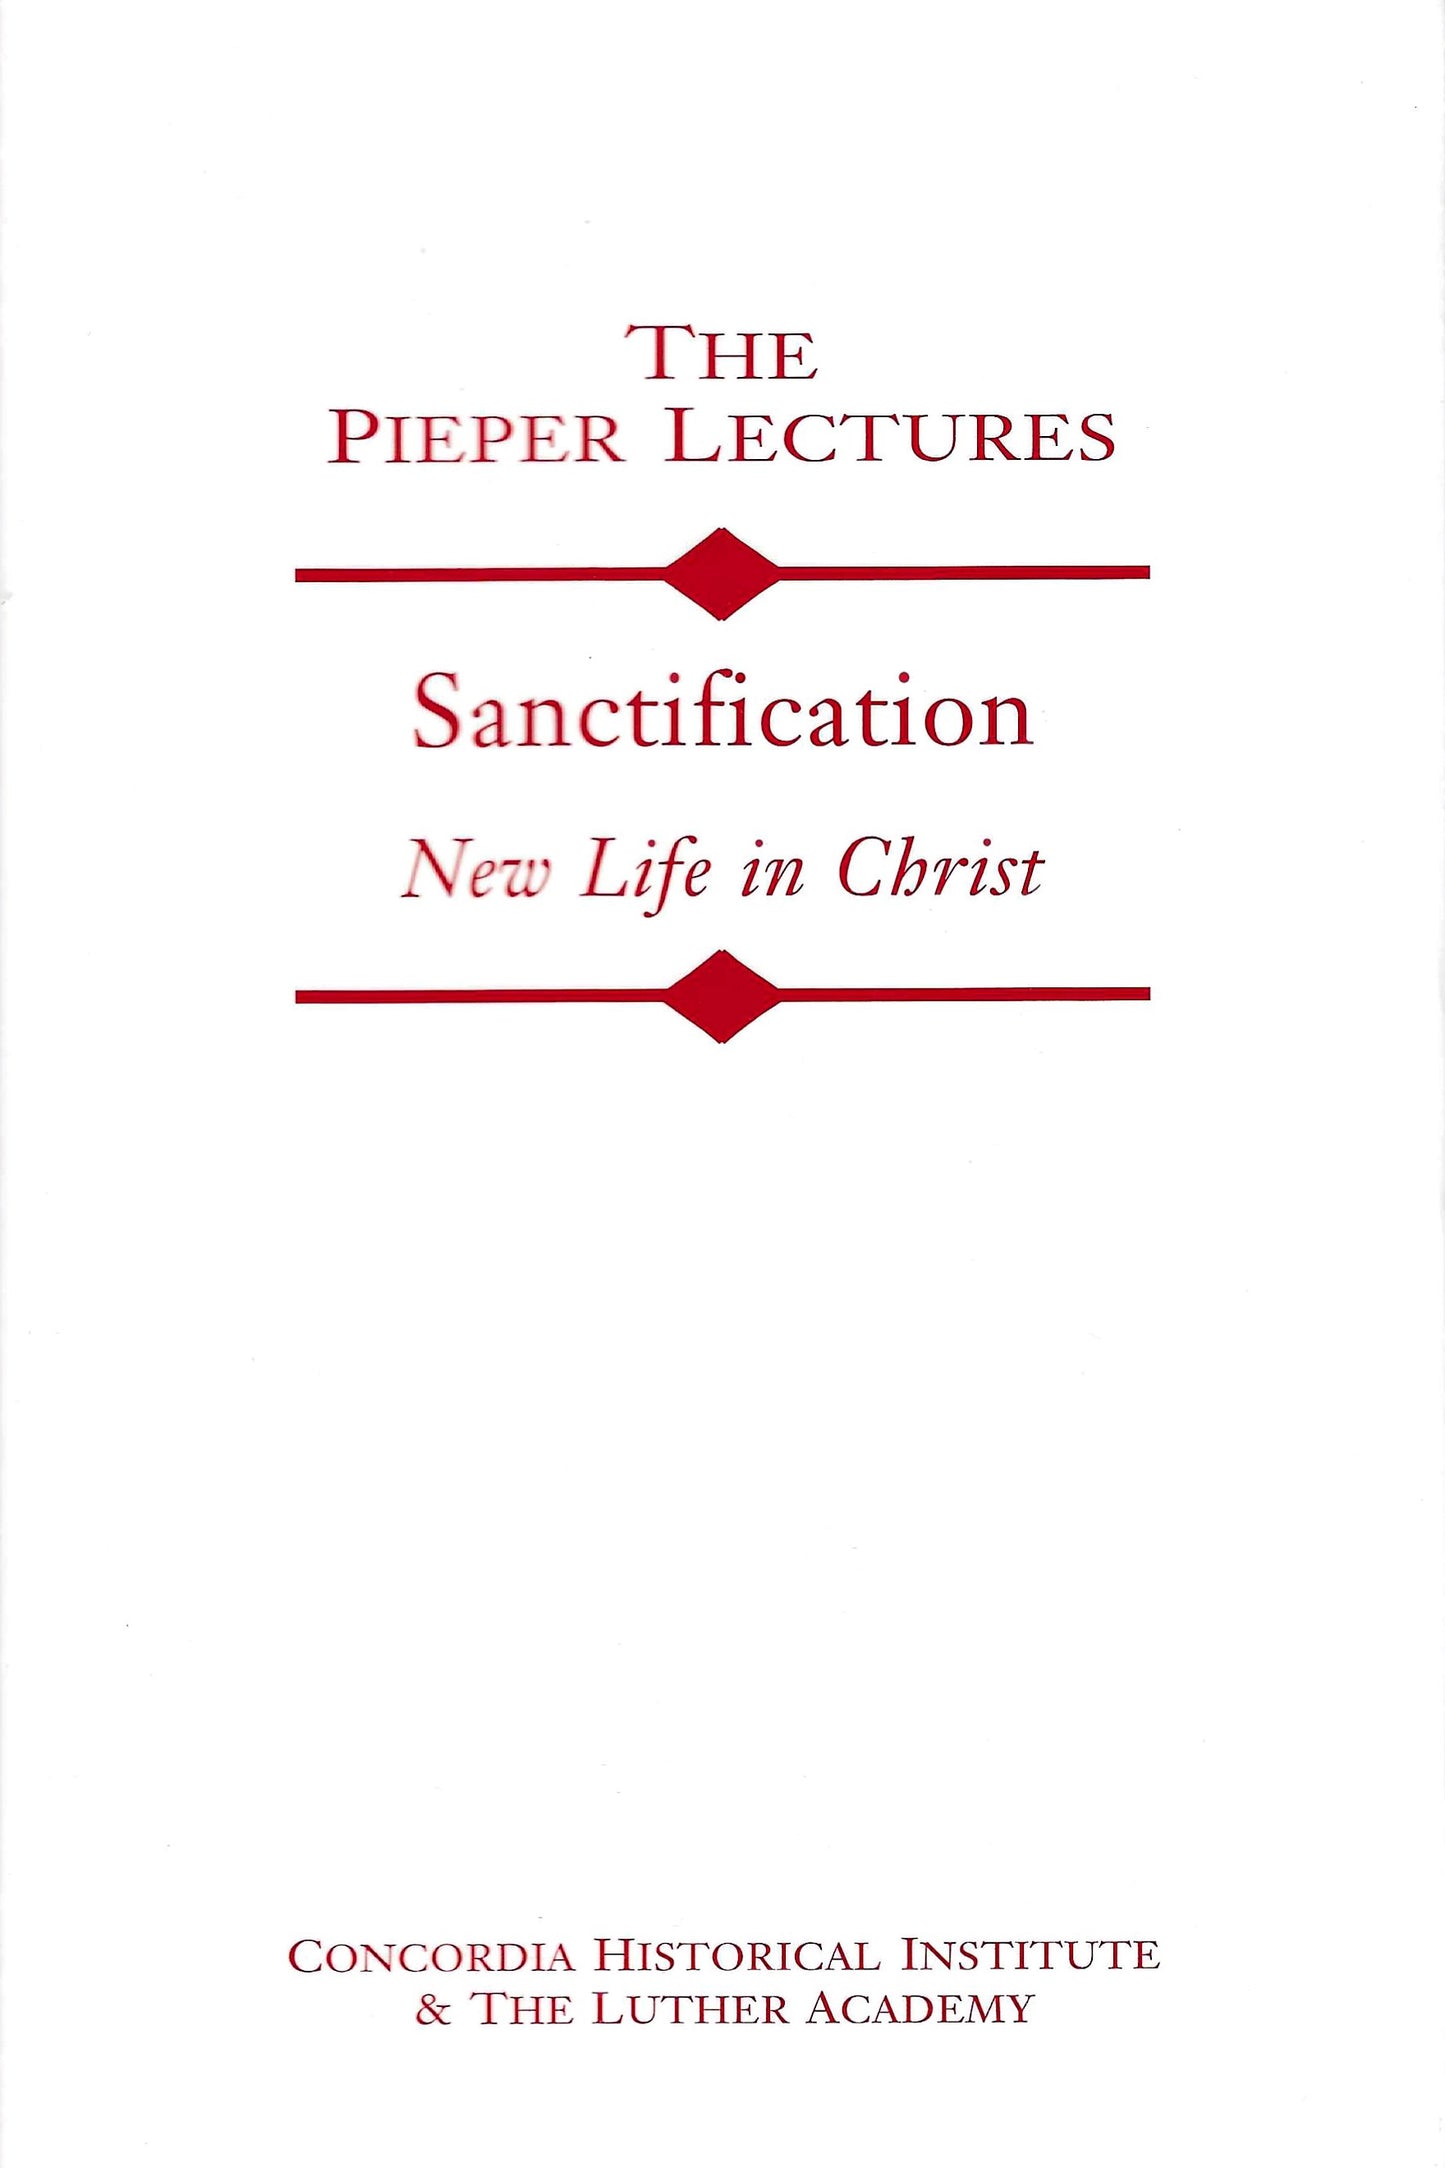 Sanctification: New Life in Christ (Vol. 7, 2003)